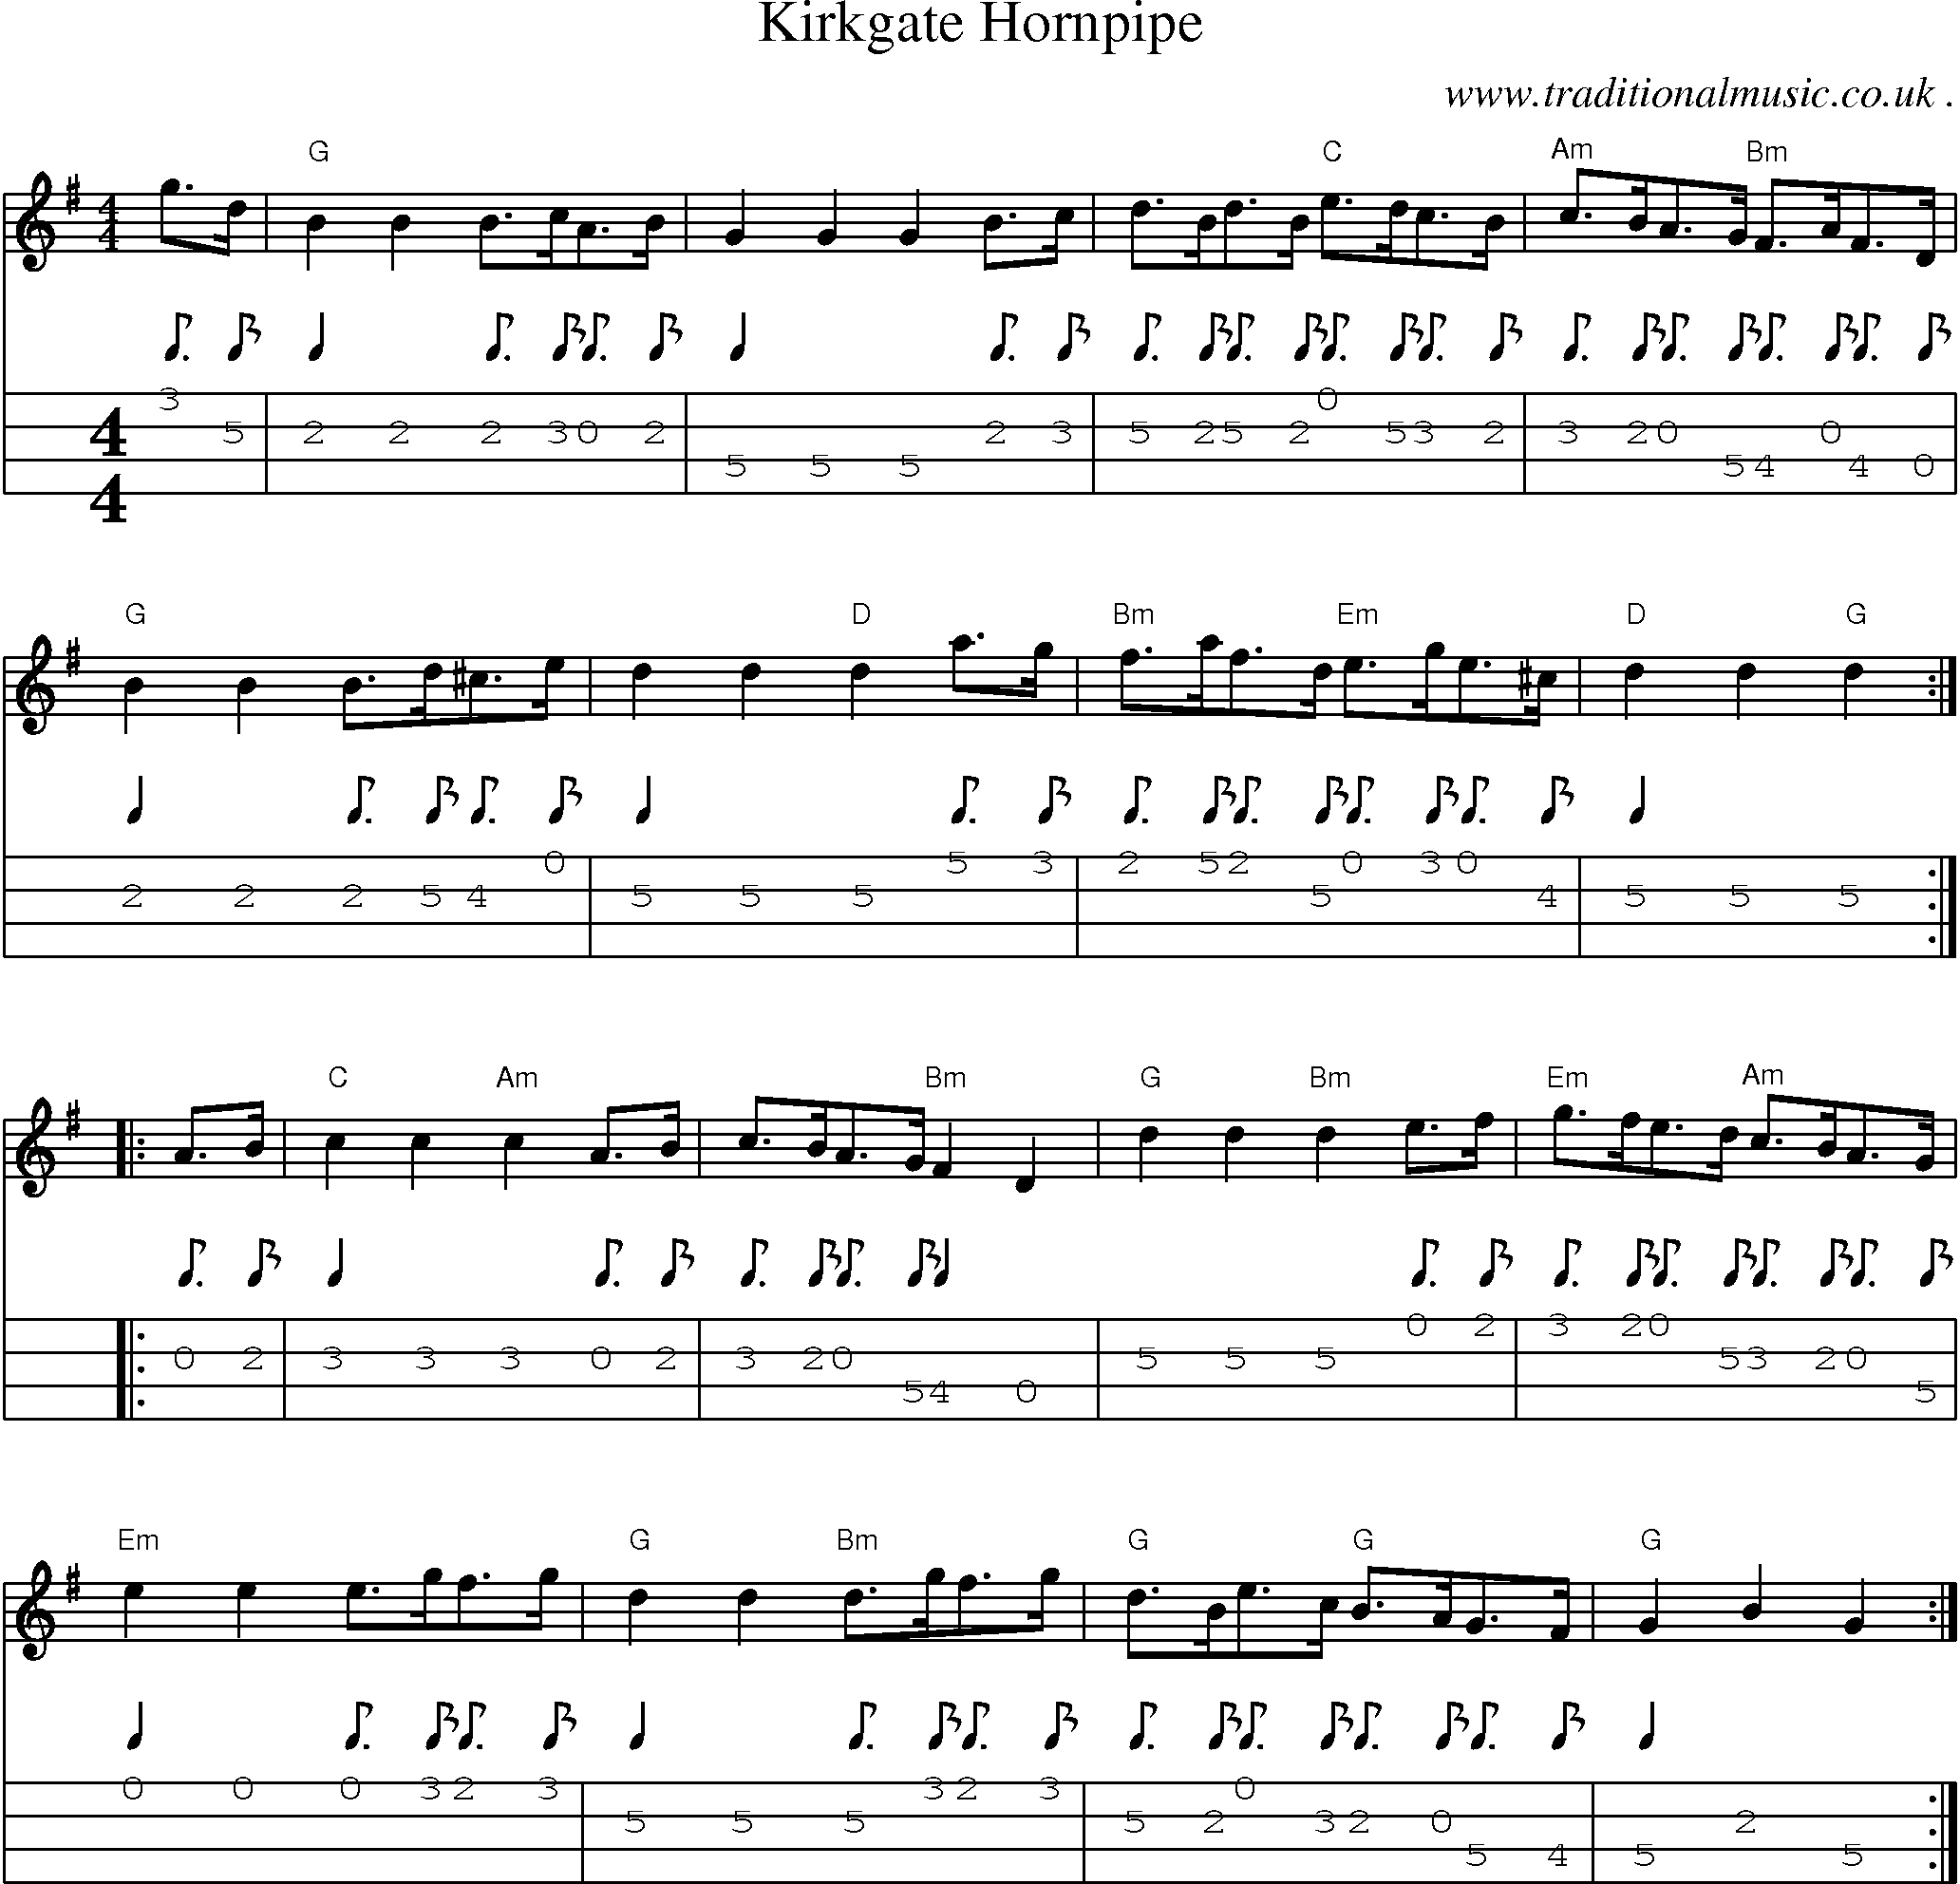 Music Score and Guitar Tabs for Kirkgate Hornpipe